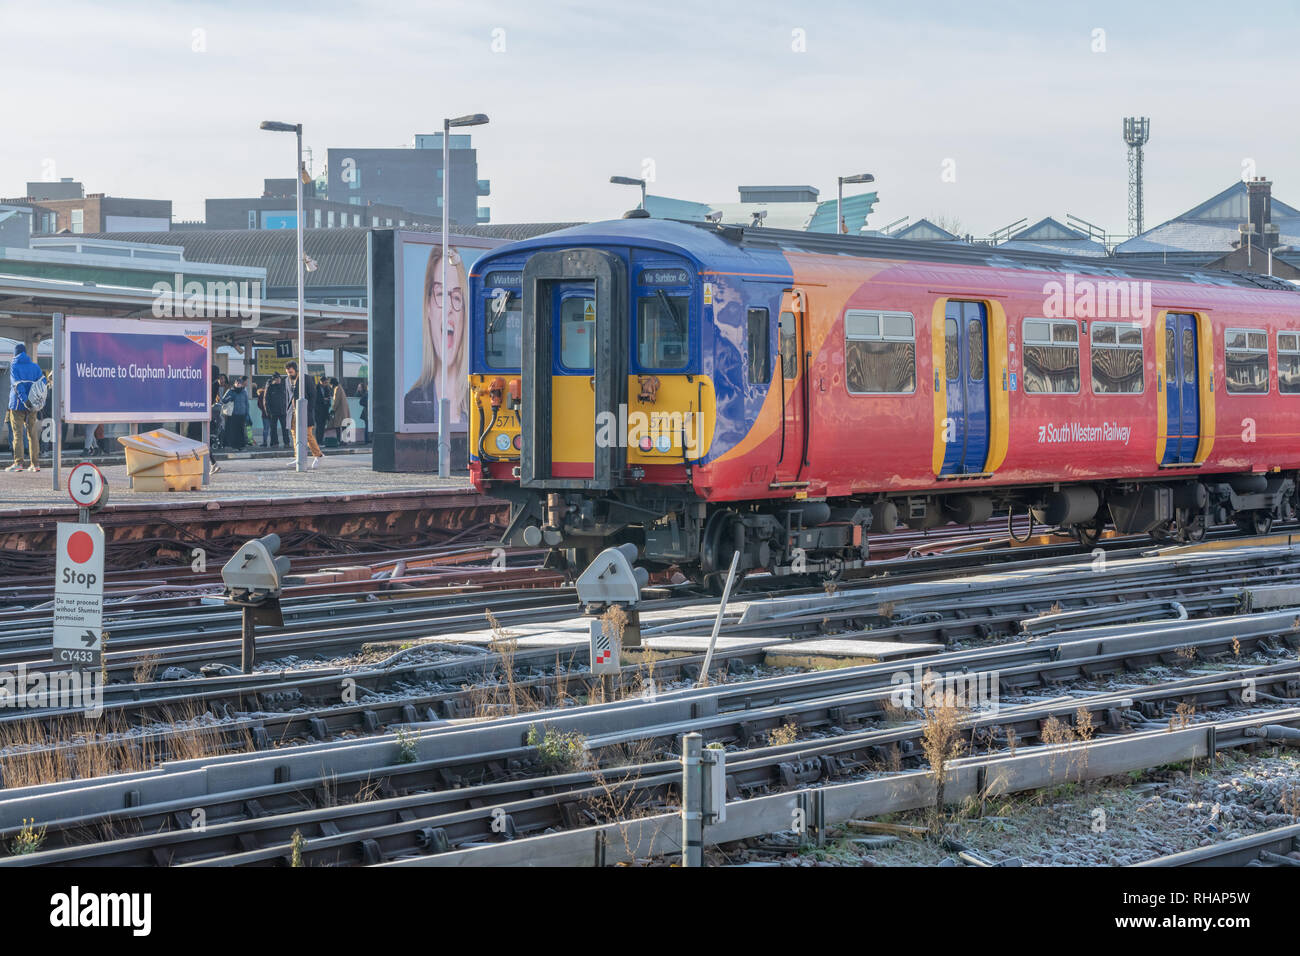 31st January 2019; Clapham Junction, London, UK; Train at Station. Tracks in Foreground and Platform Behind Stock Photo